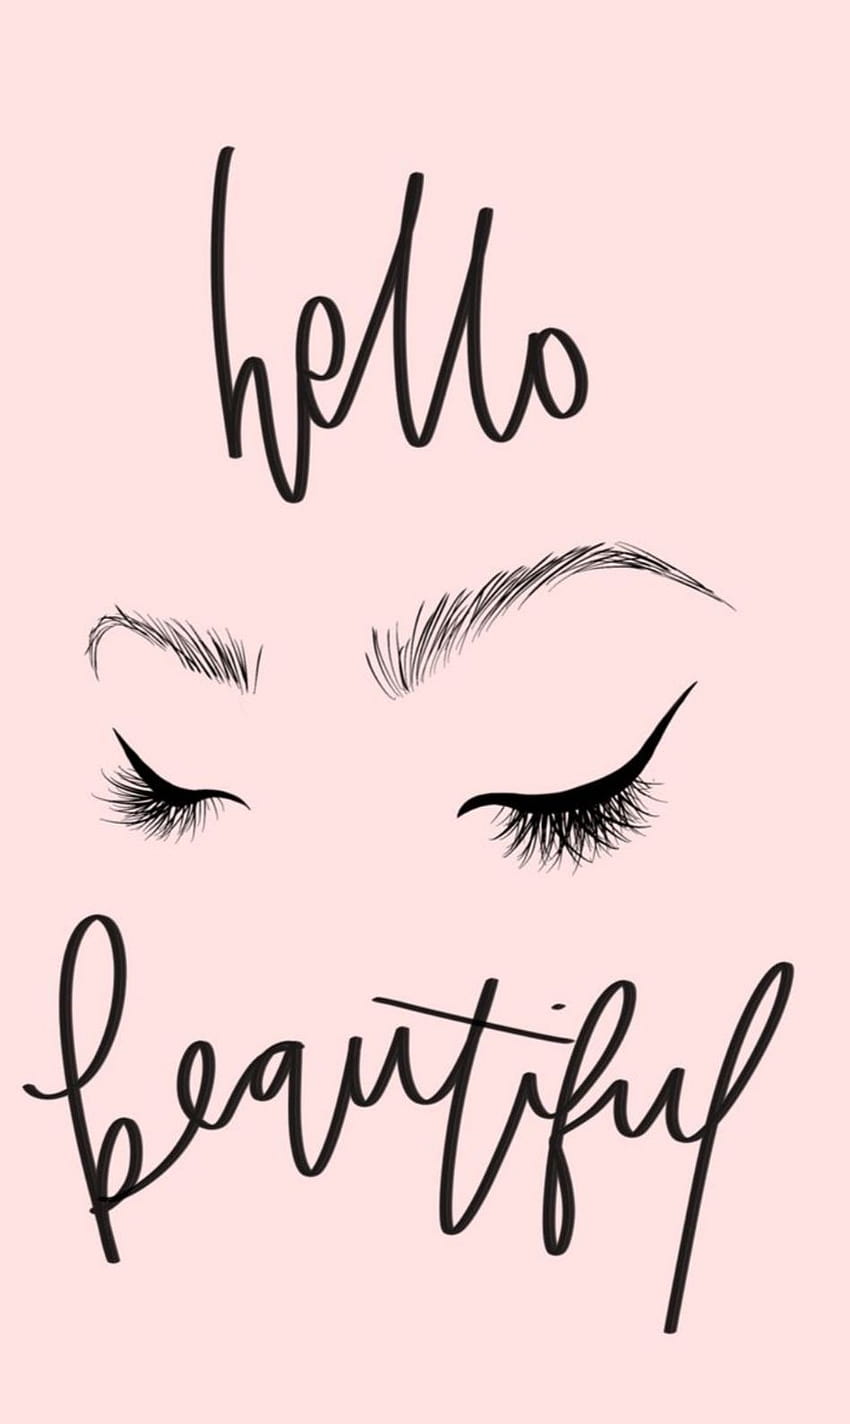 Wallpaper design for hello gorgeous greeting card Vector Image